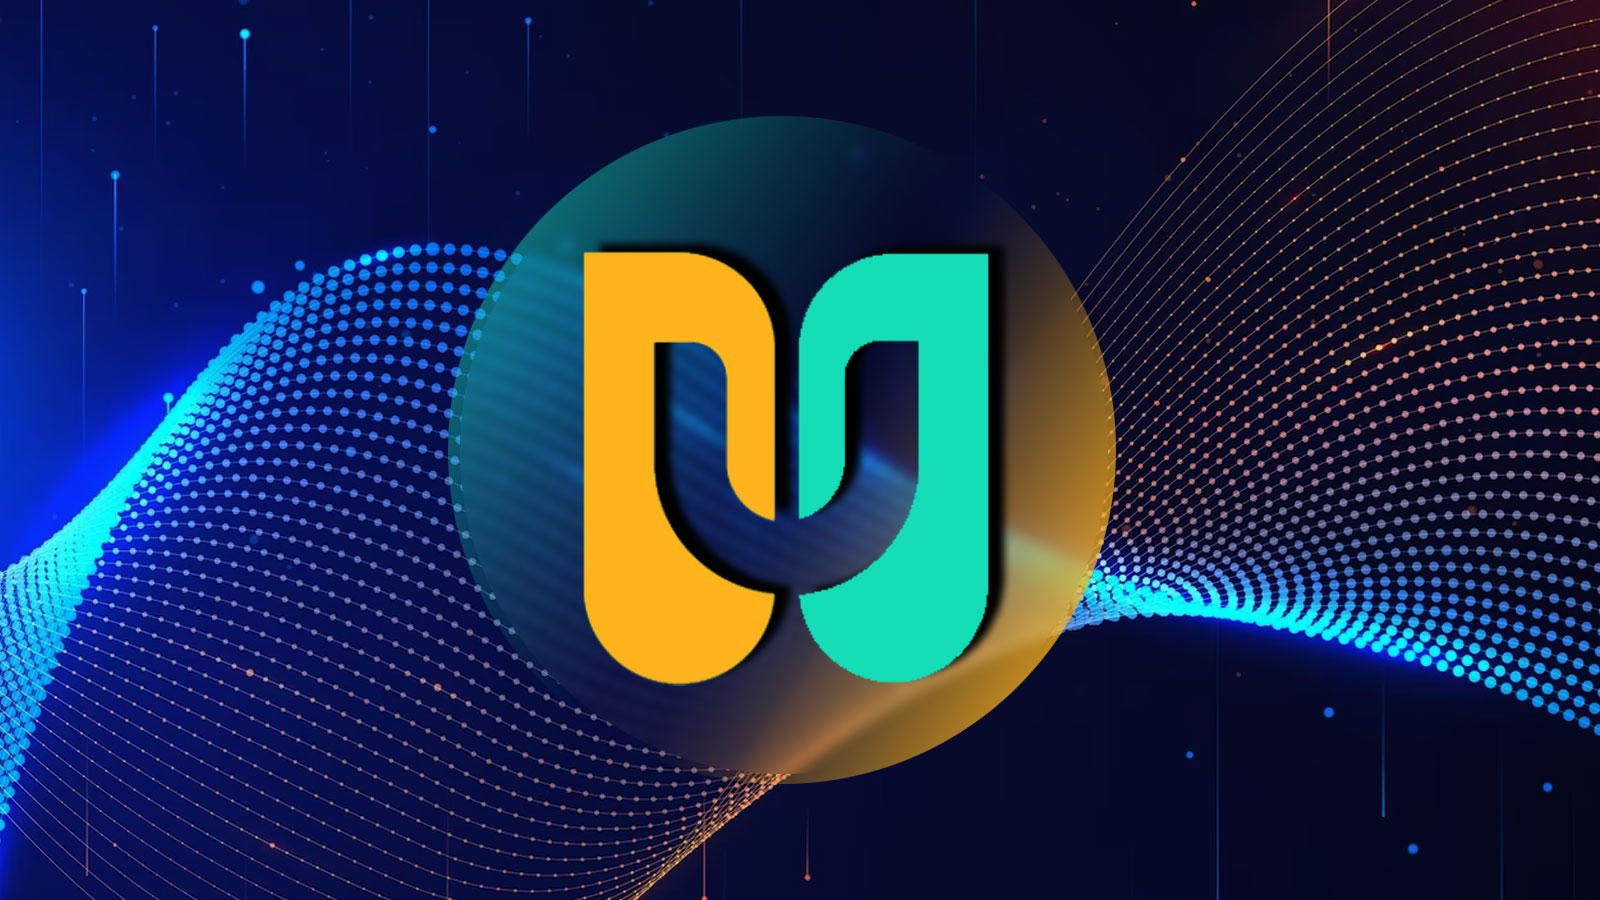 Uwerx (WERX) Pre-Sale Might Attract Dogecoin (DOGE) and Avalanche (AVAX) Communities in 2023